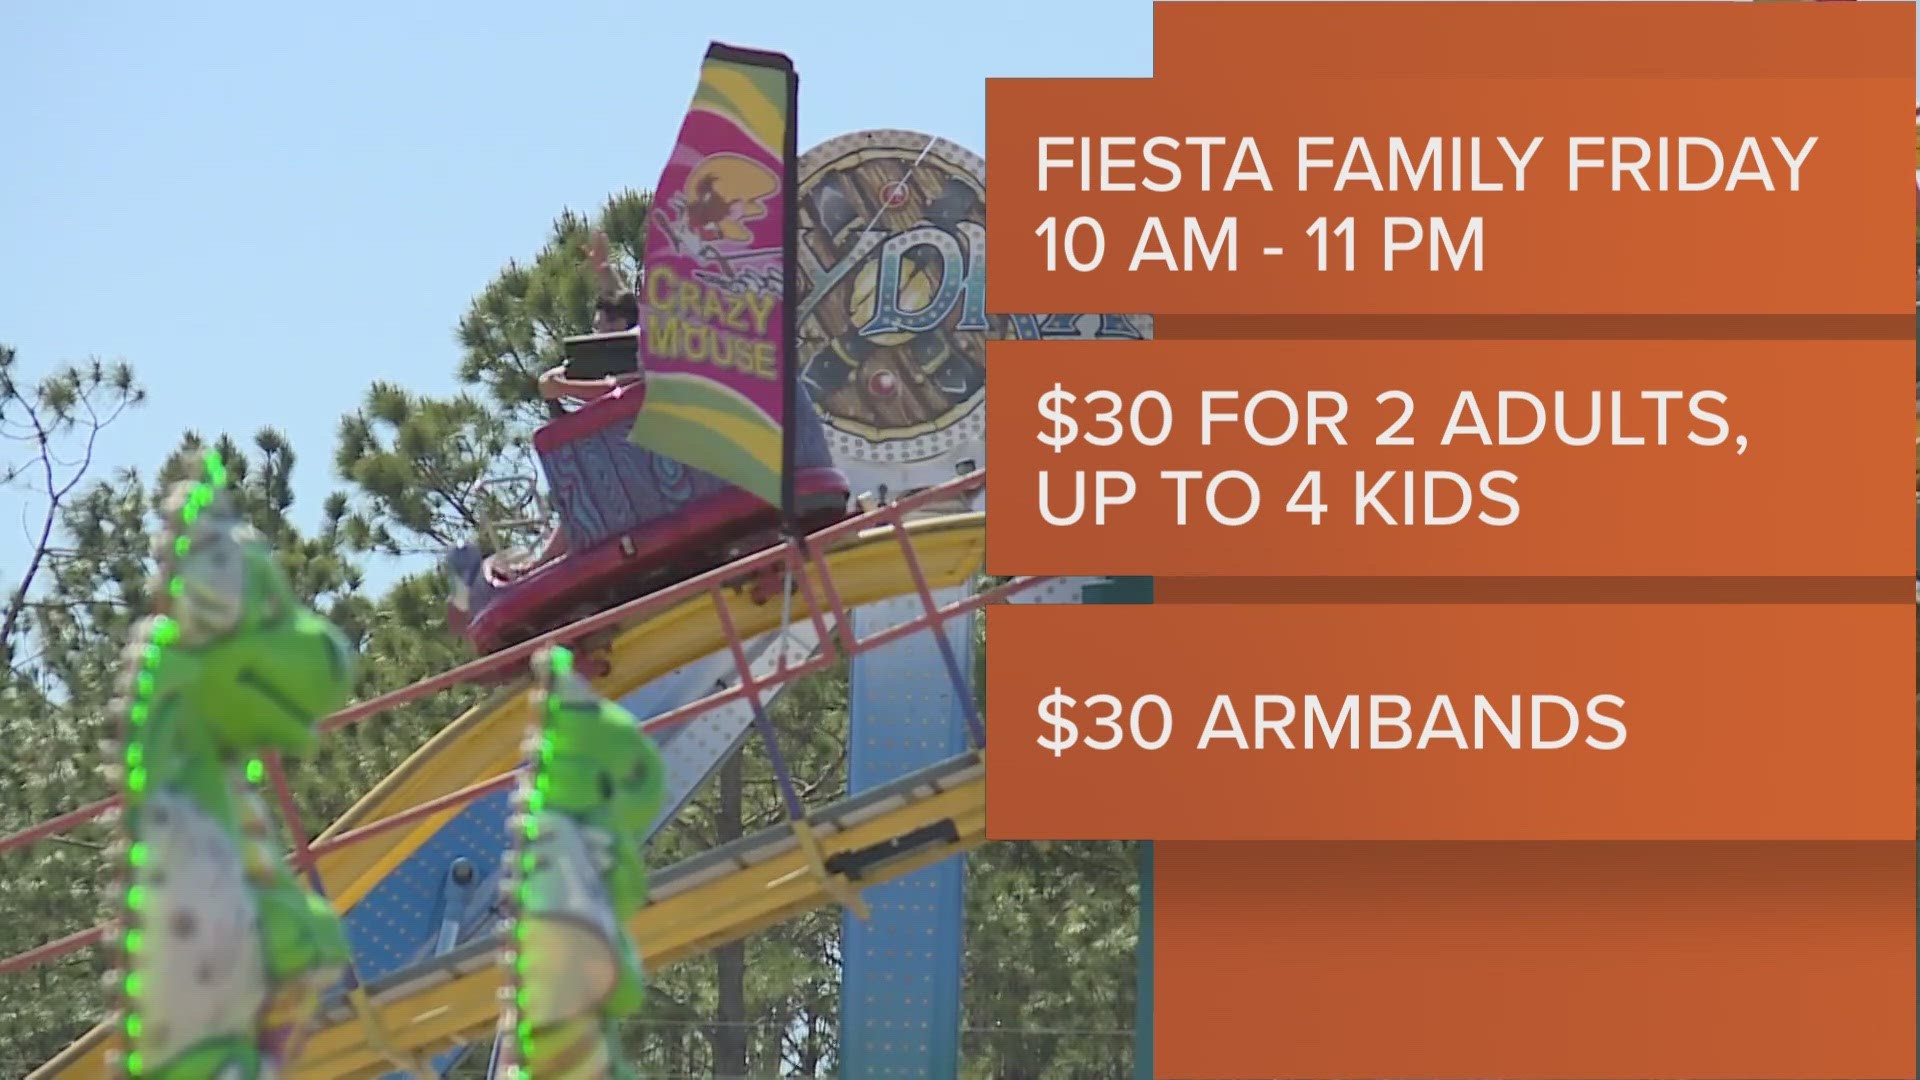 Fiesta Family Friday at the Clay County Fair is from 10 a.m. to 11 p.m. The cost is $30 and includes admission for two adults and up to four kids.